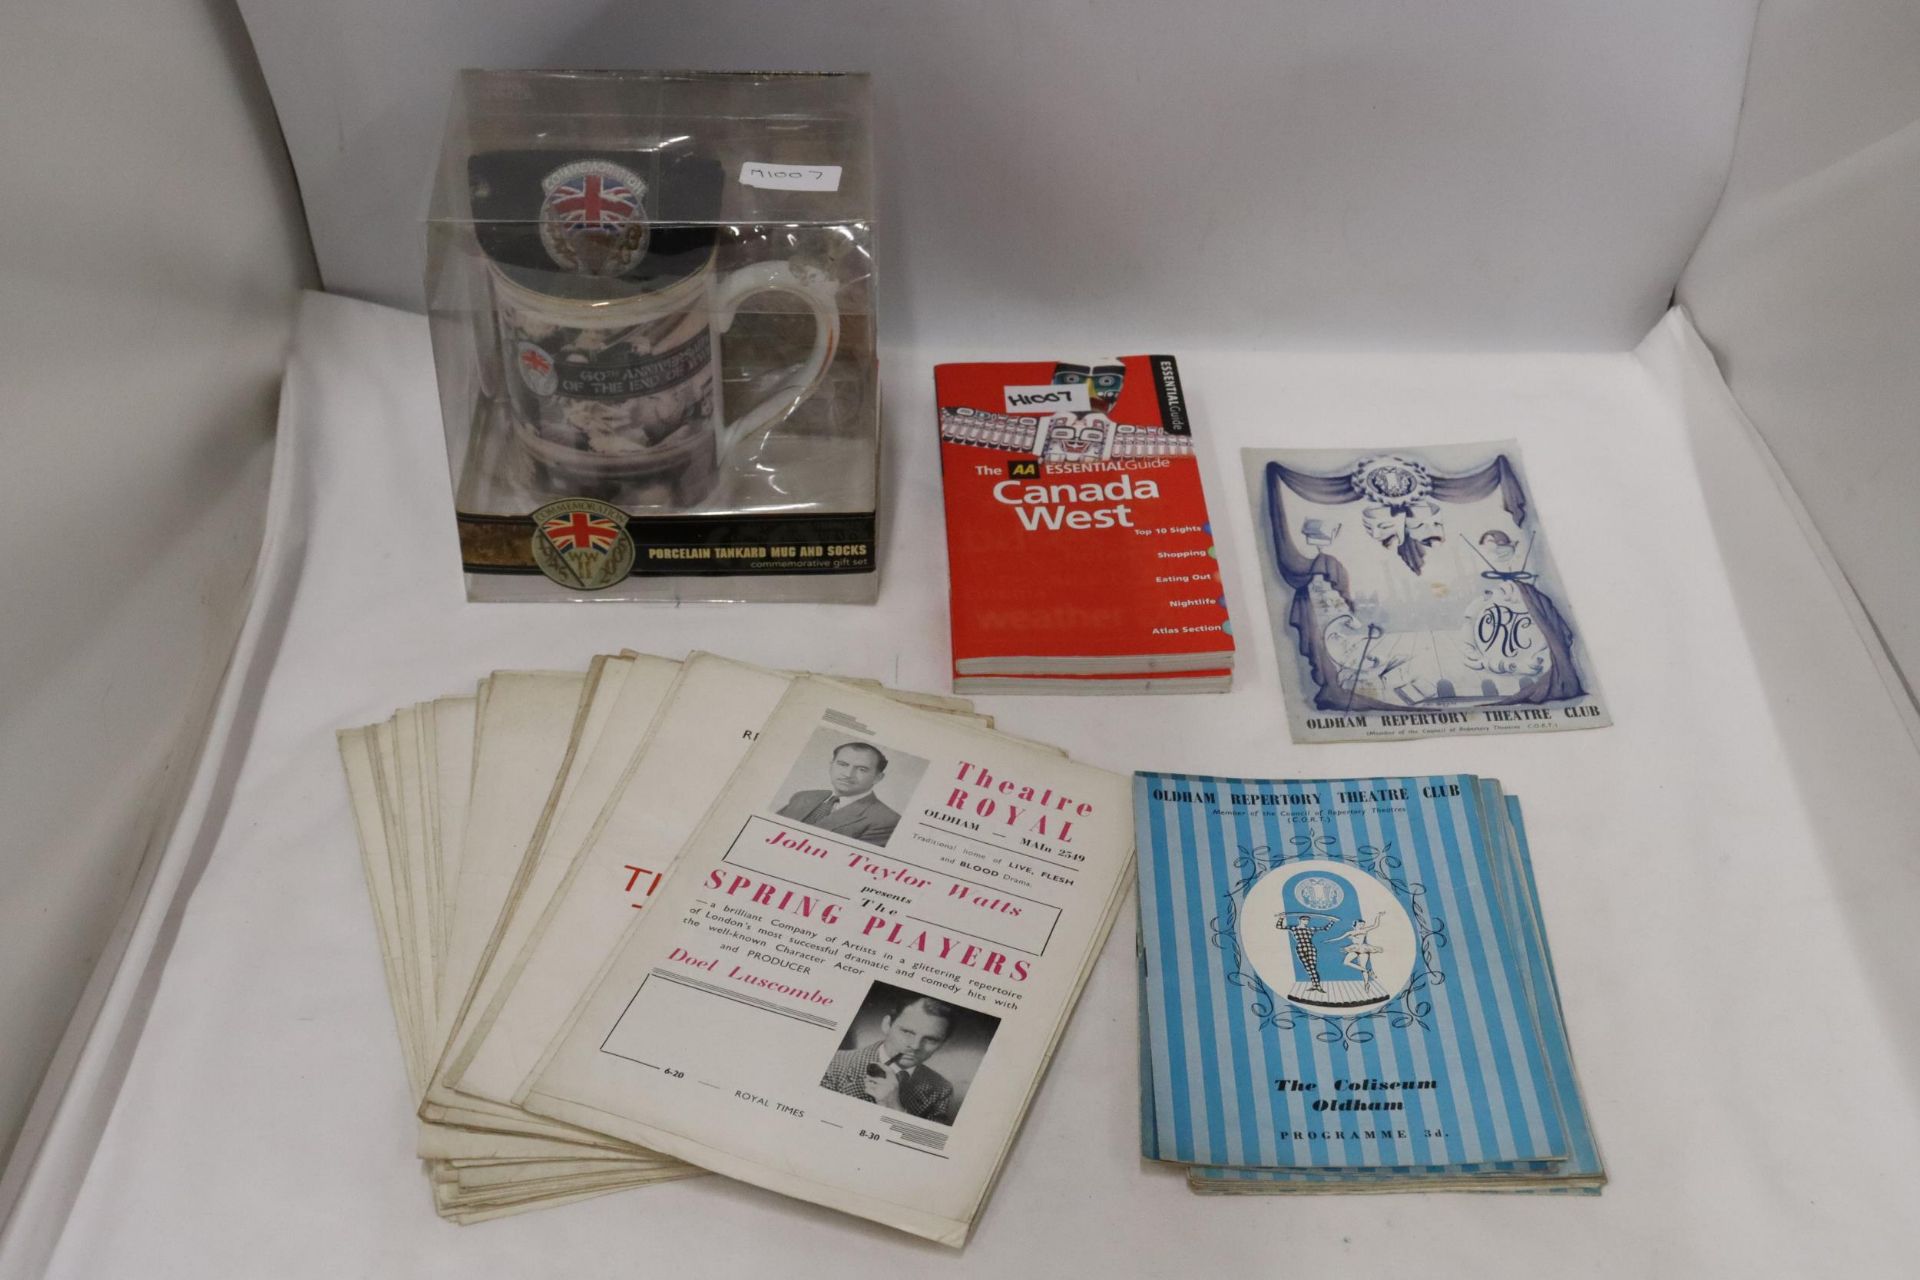 A COLLECTION OF VINTAGE THATRE PROGRAMMES RELATING TO OLDHAM REPERTORY THEATRE CLUB, PLUS TWO